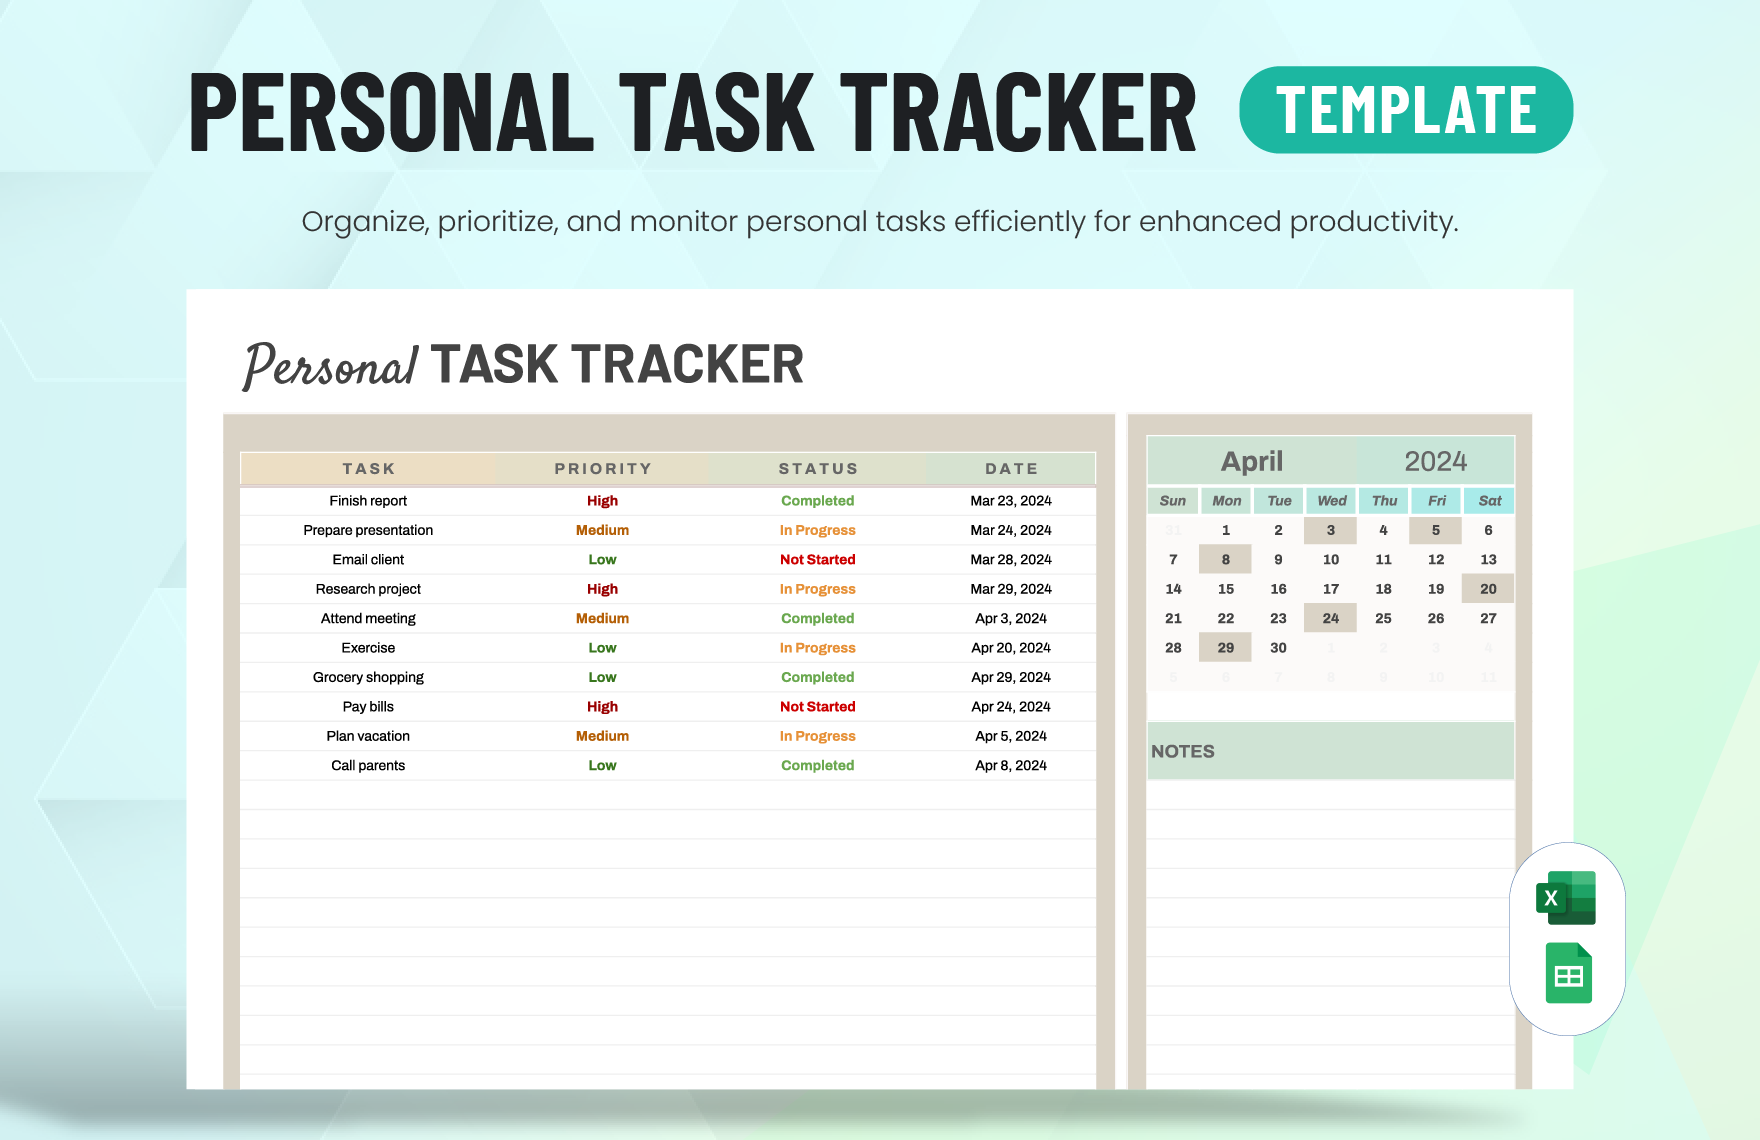 Personal Task Tracker Template in Excel, Google Sheets